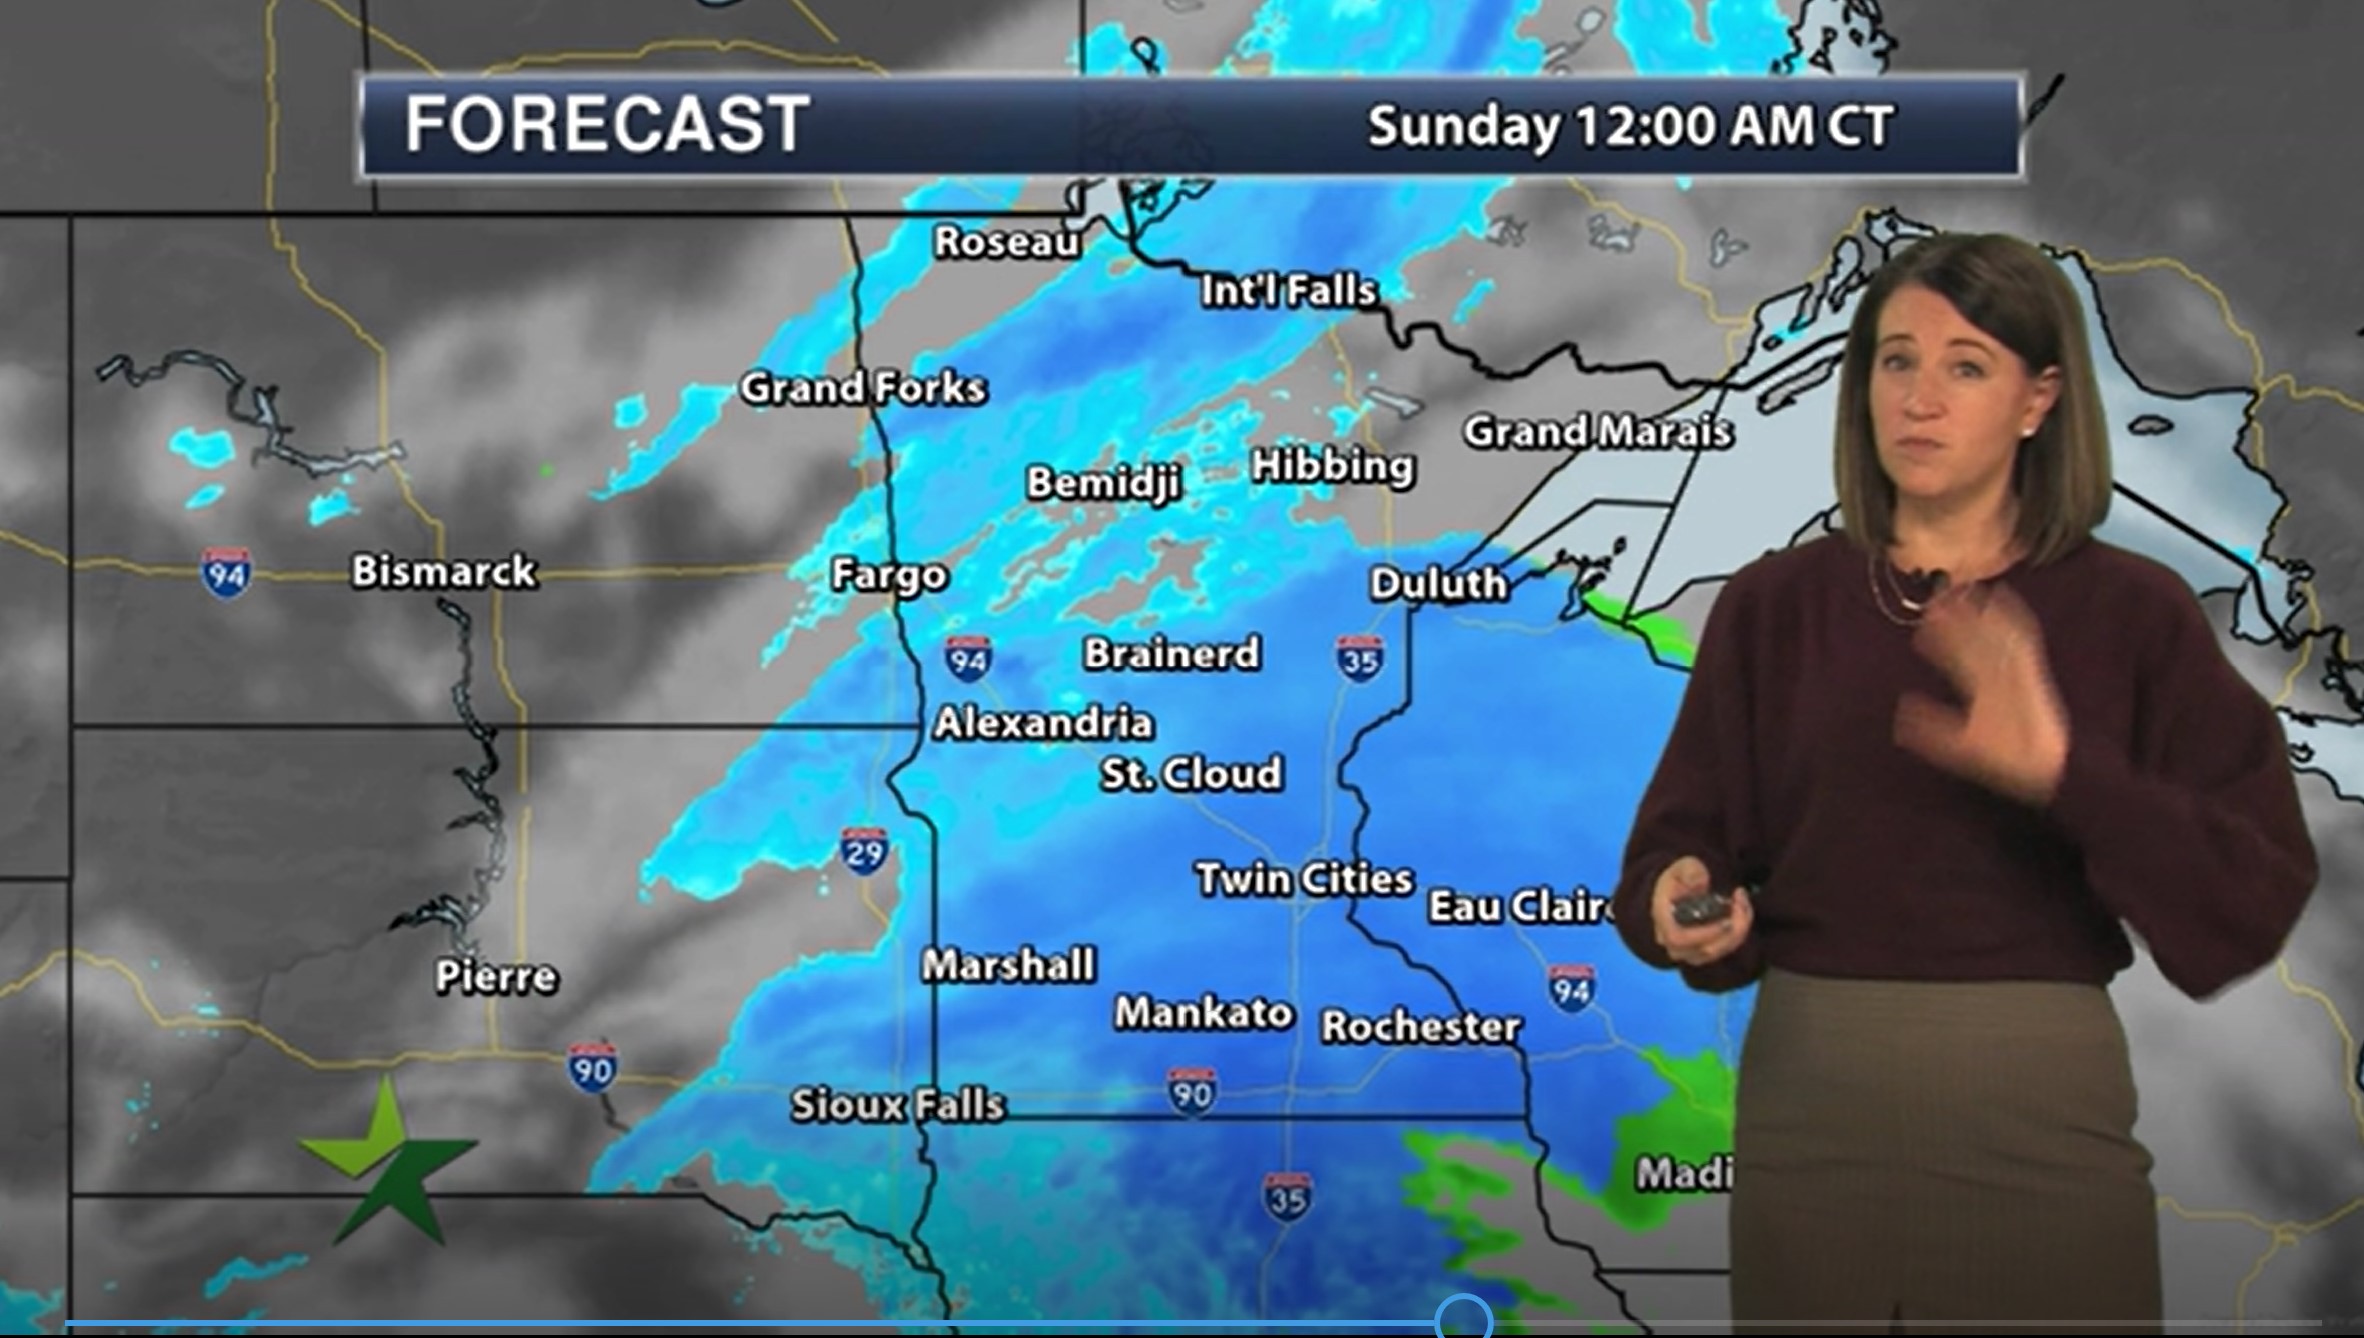 Afternoon forecast: Snow starting with 3-6" expected